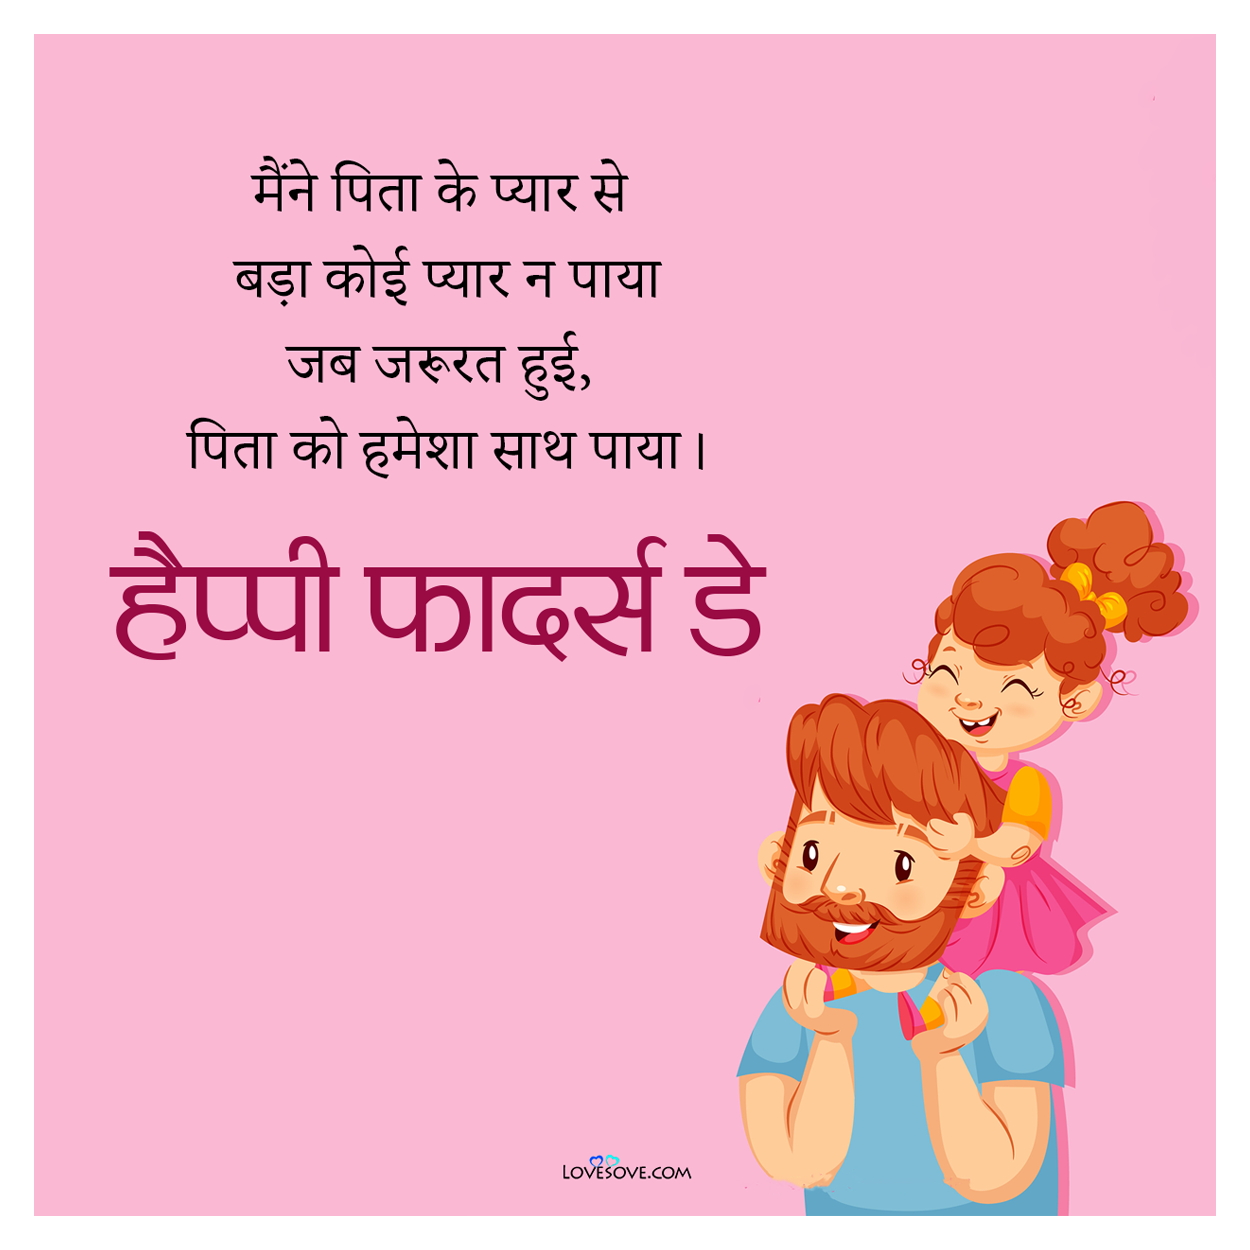 happy father day shayari from daughter hindi wishses lovesove 3, important days